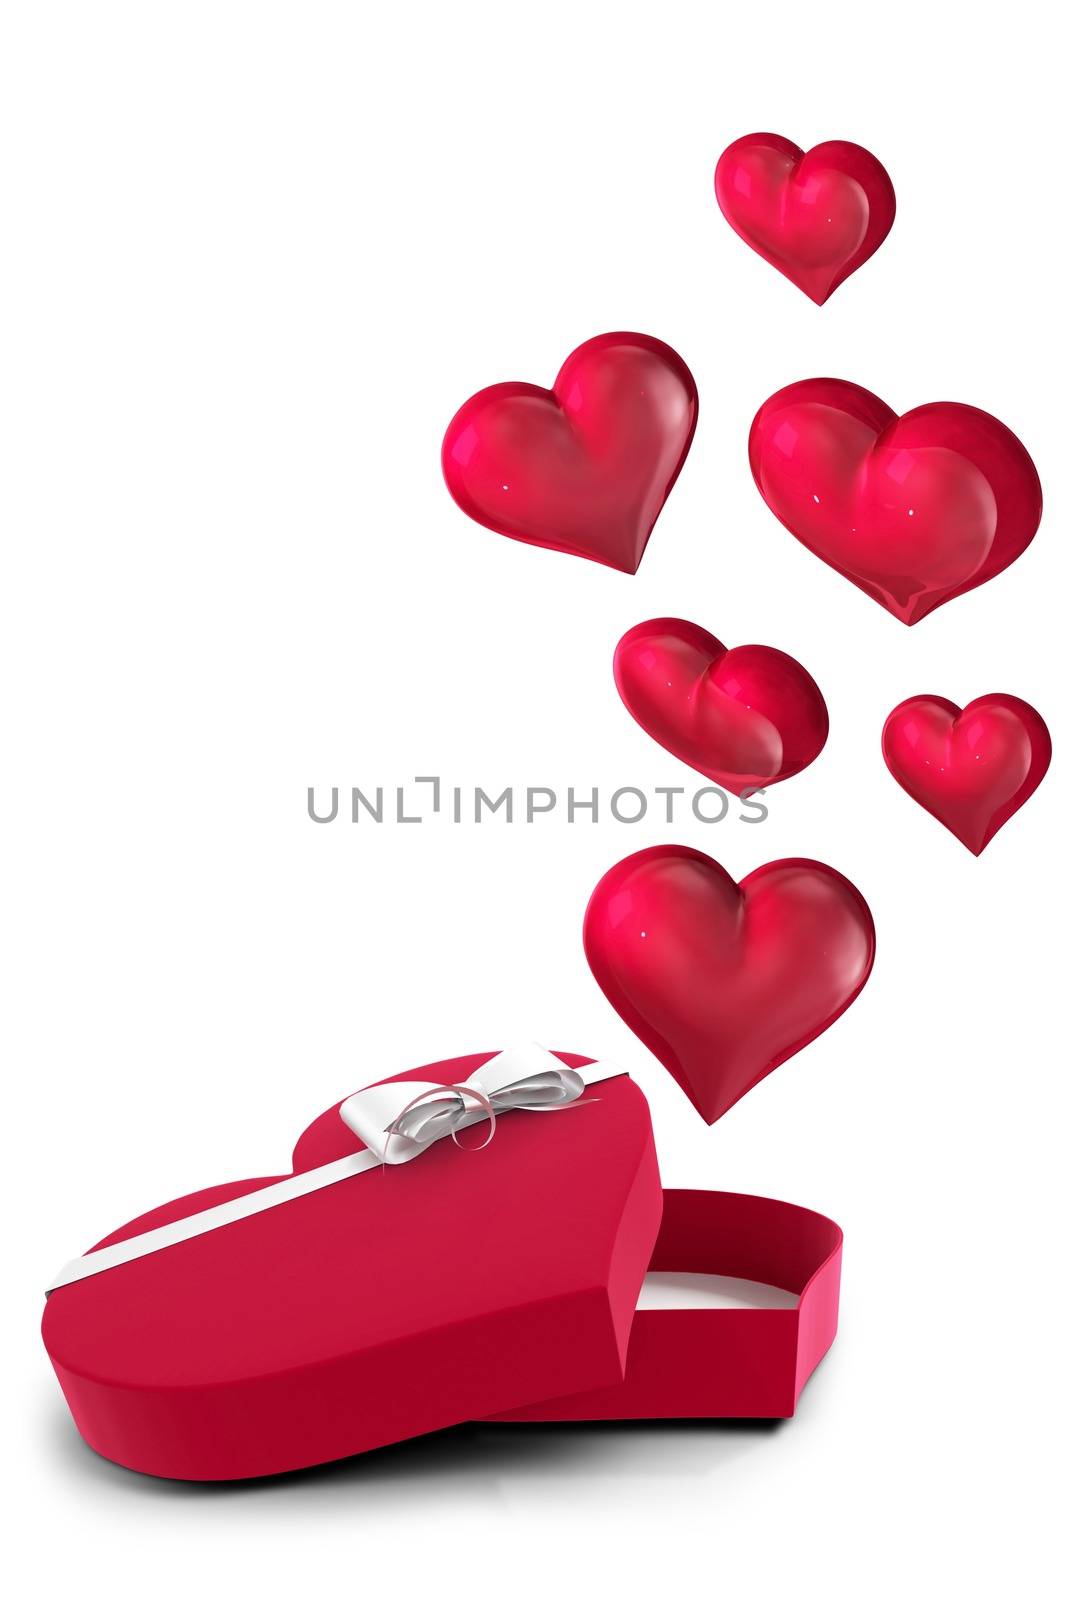 Hearts flying from box on white background